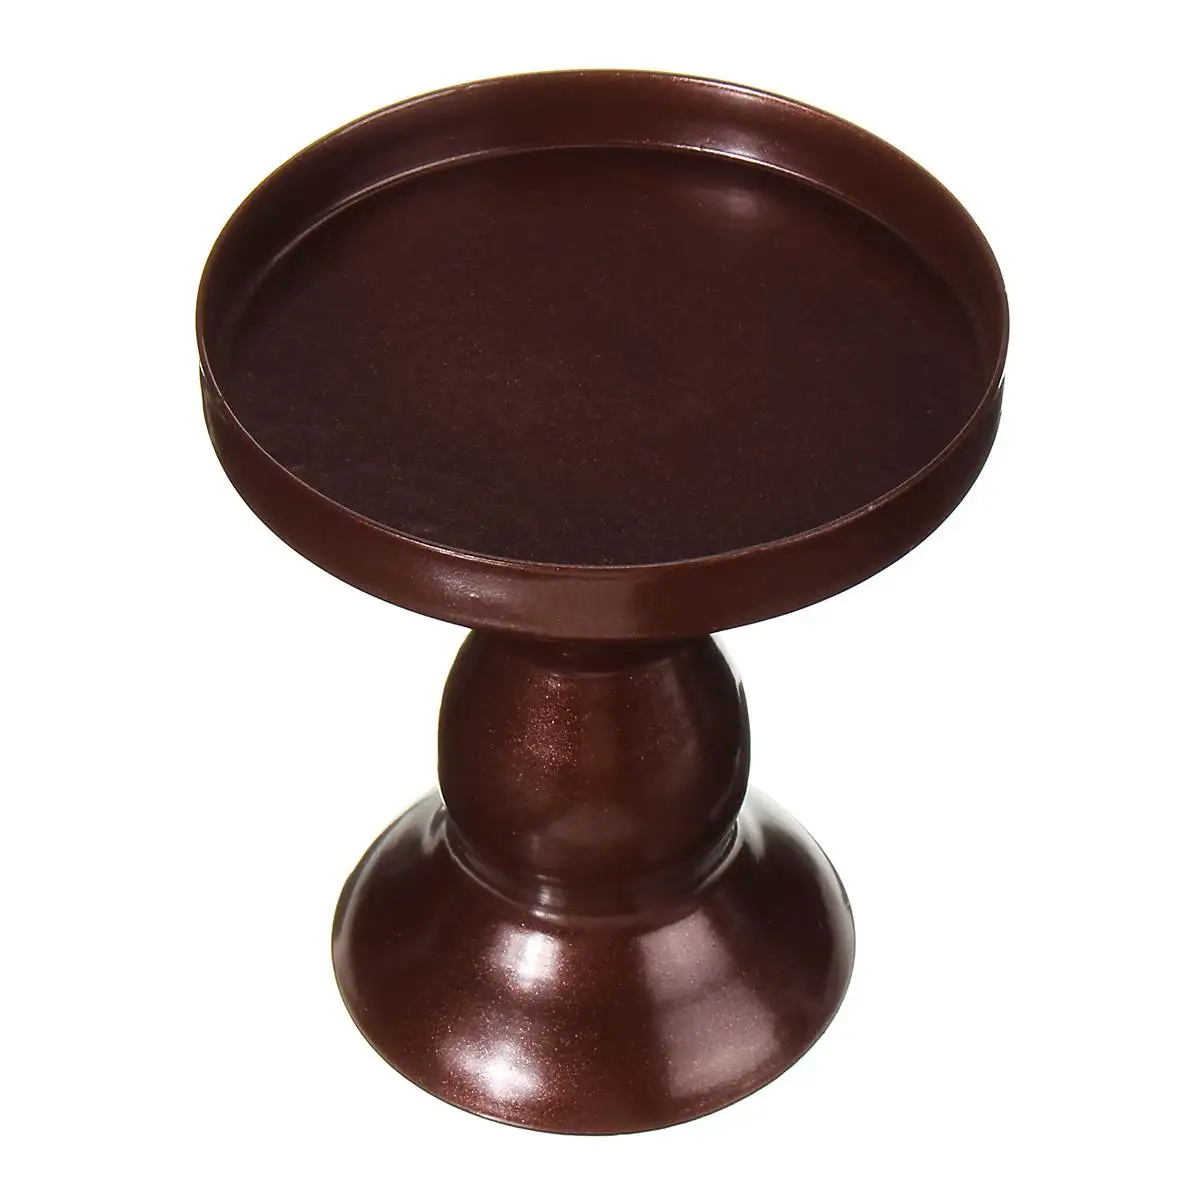 8cm Round Cake Stand Tray Home Wedding Party Cupcake Display Holder 